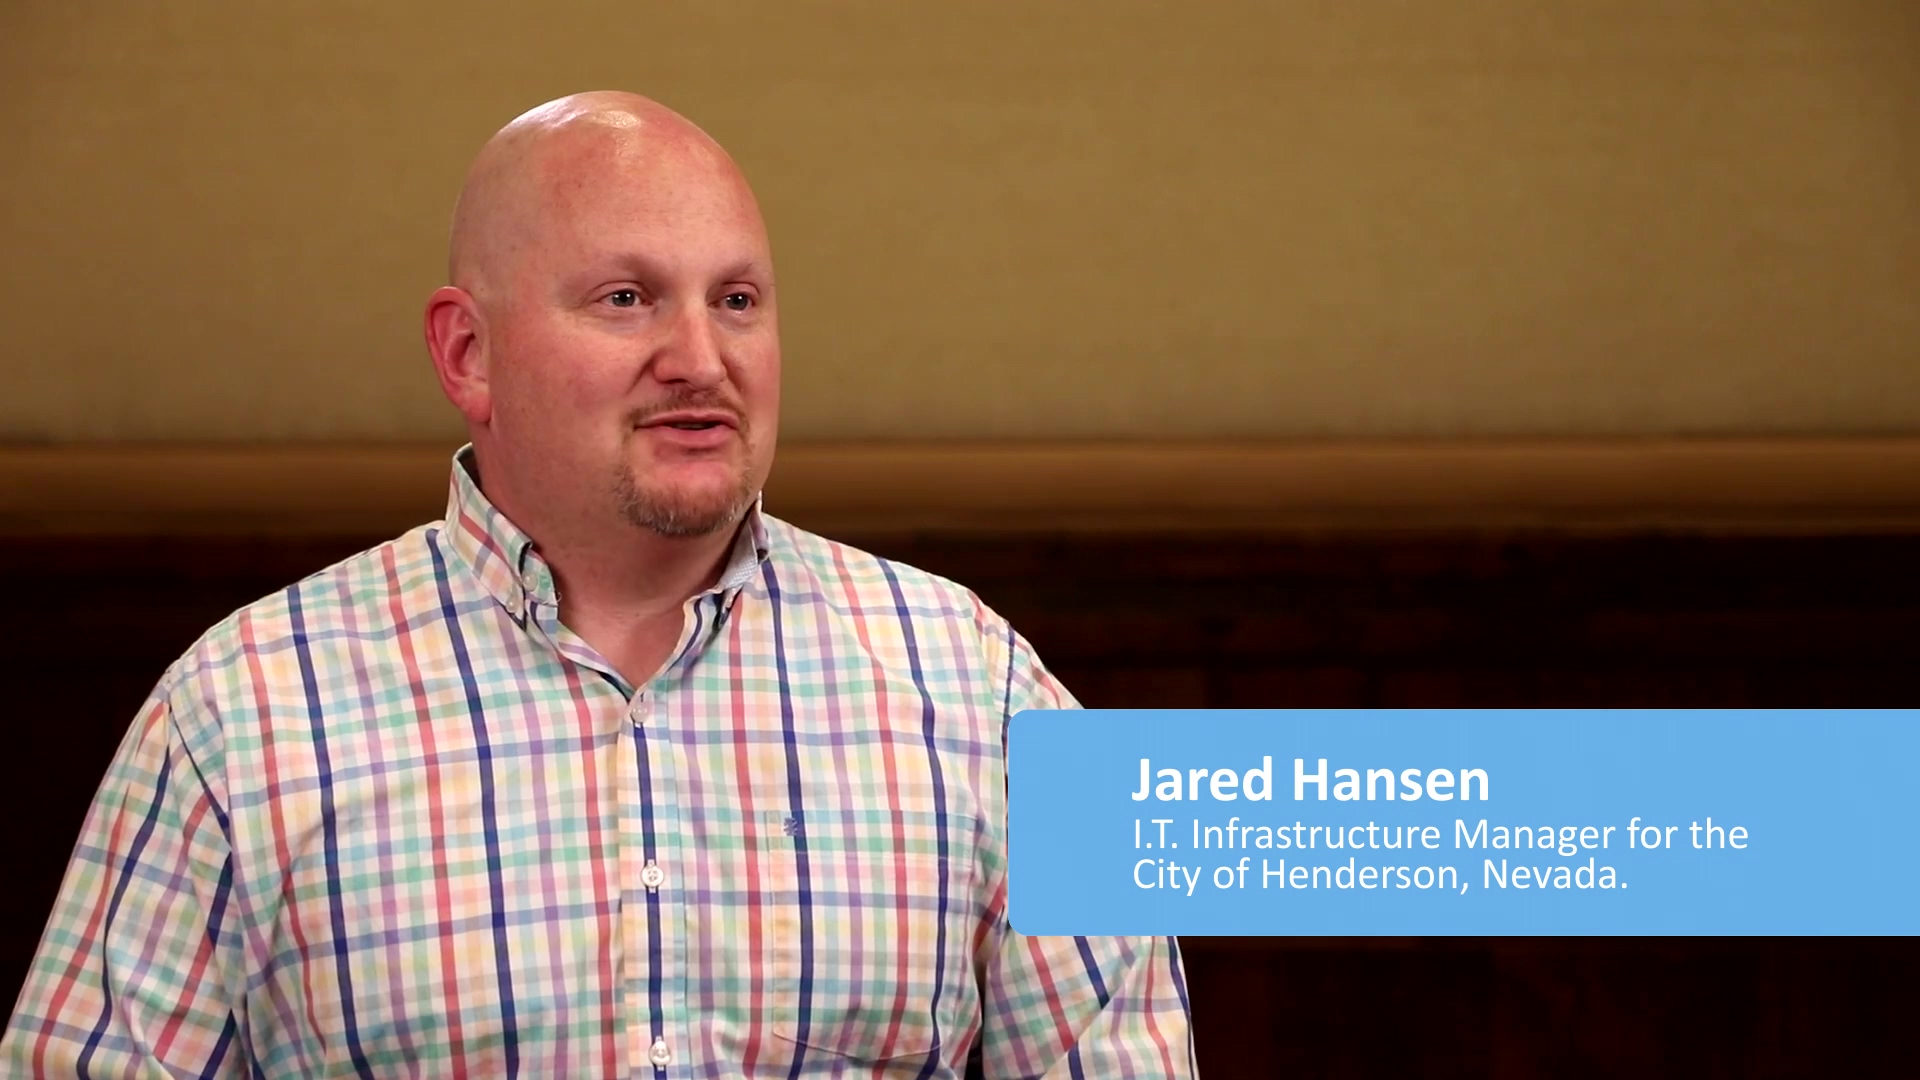 Jared Hansen, IT Infrastructure Manager for the City of Henderson, Nevada